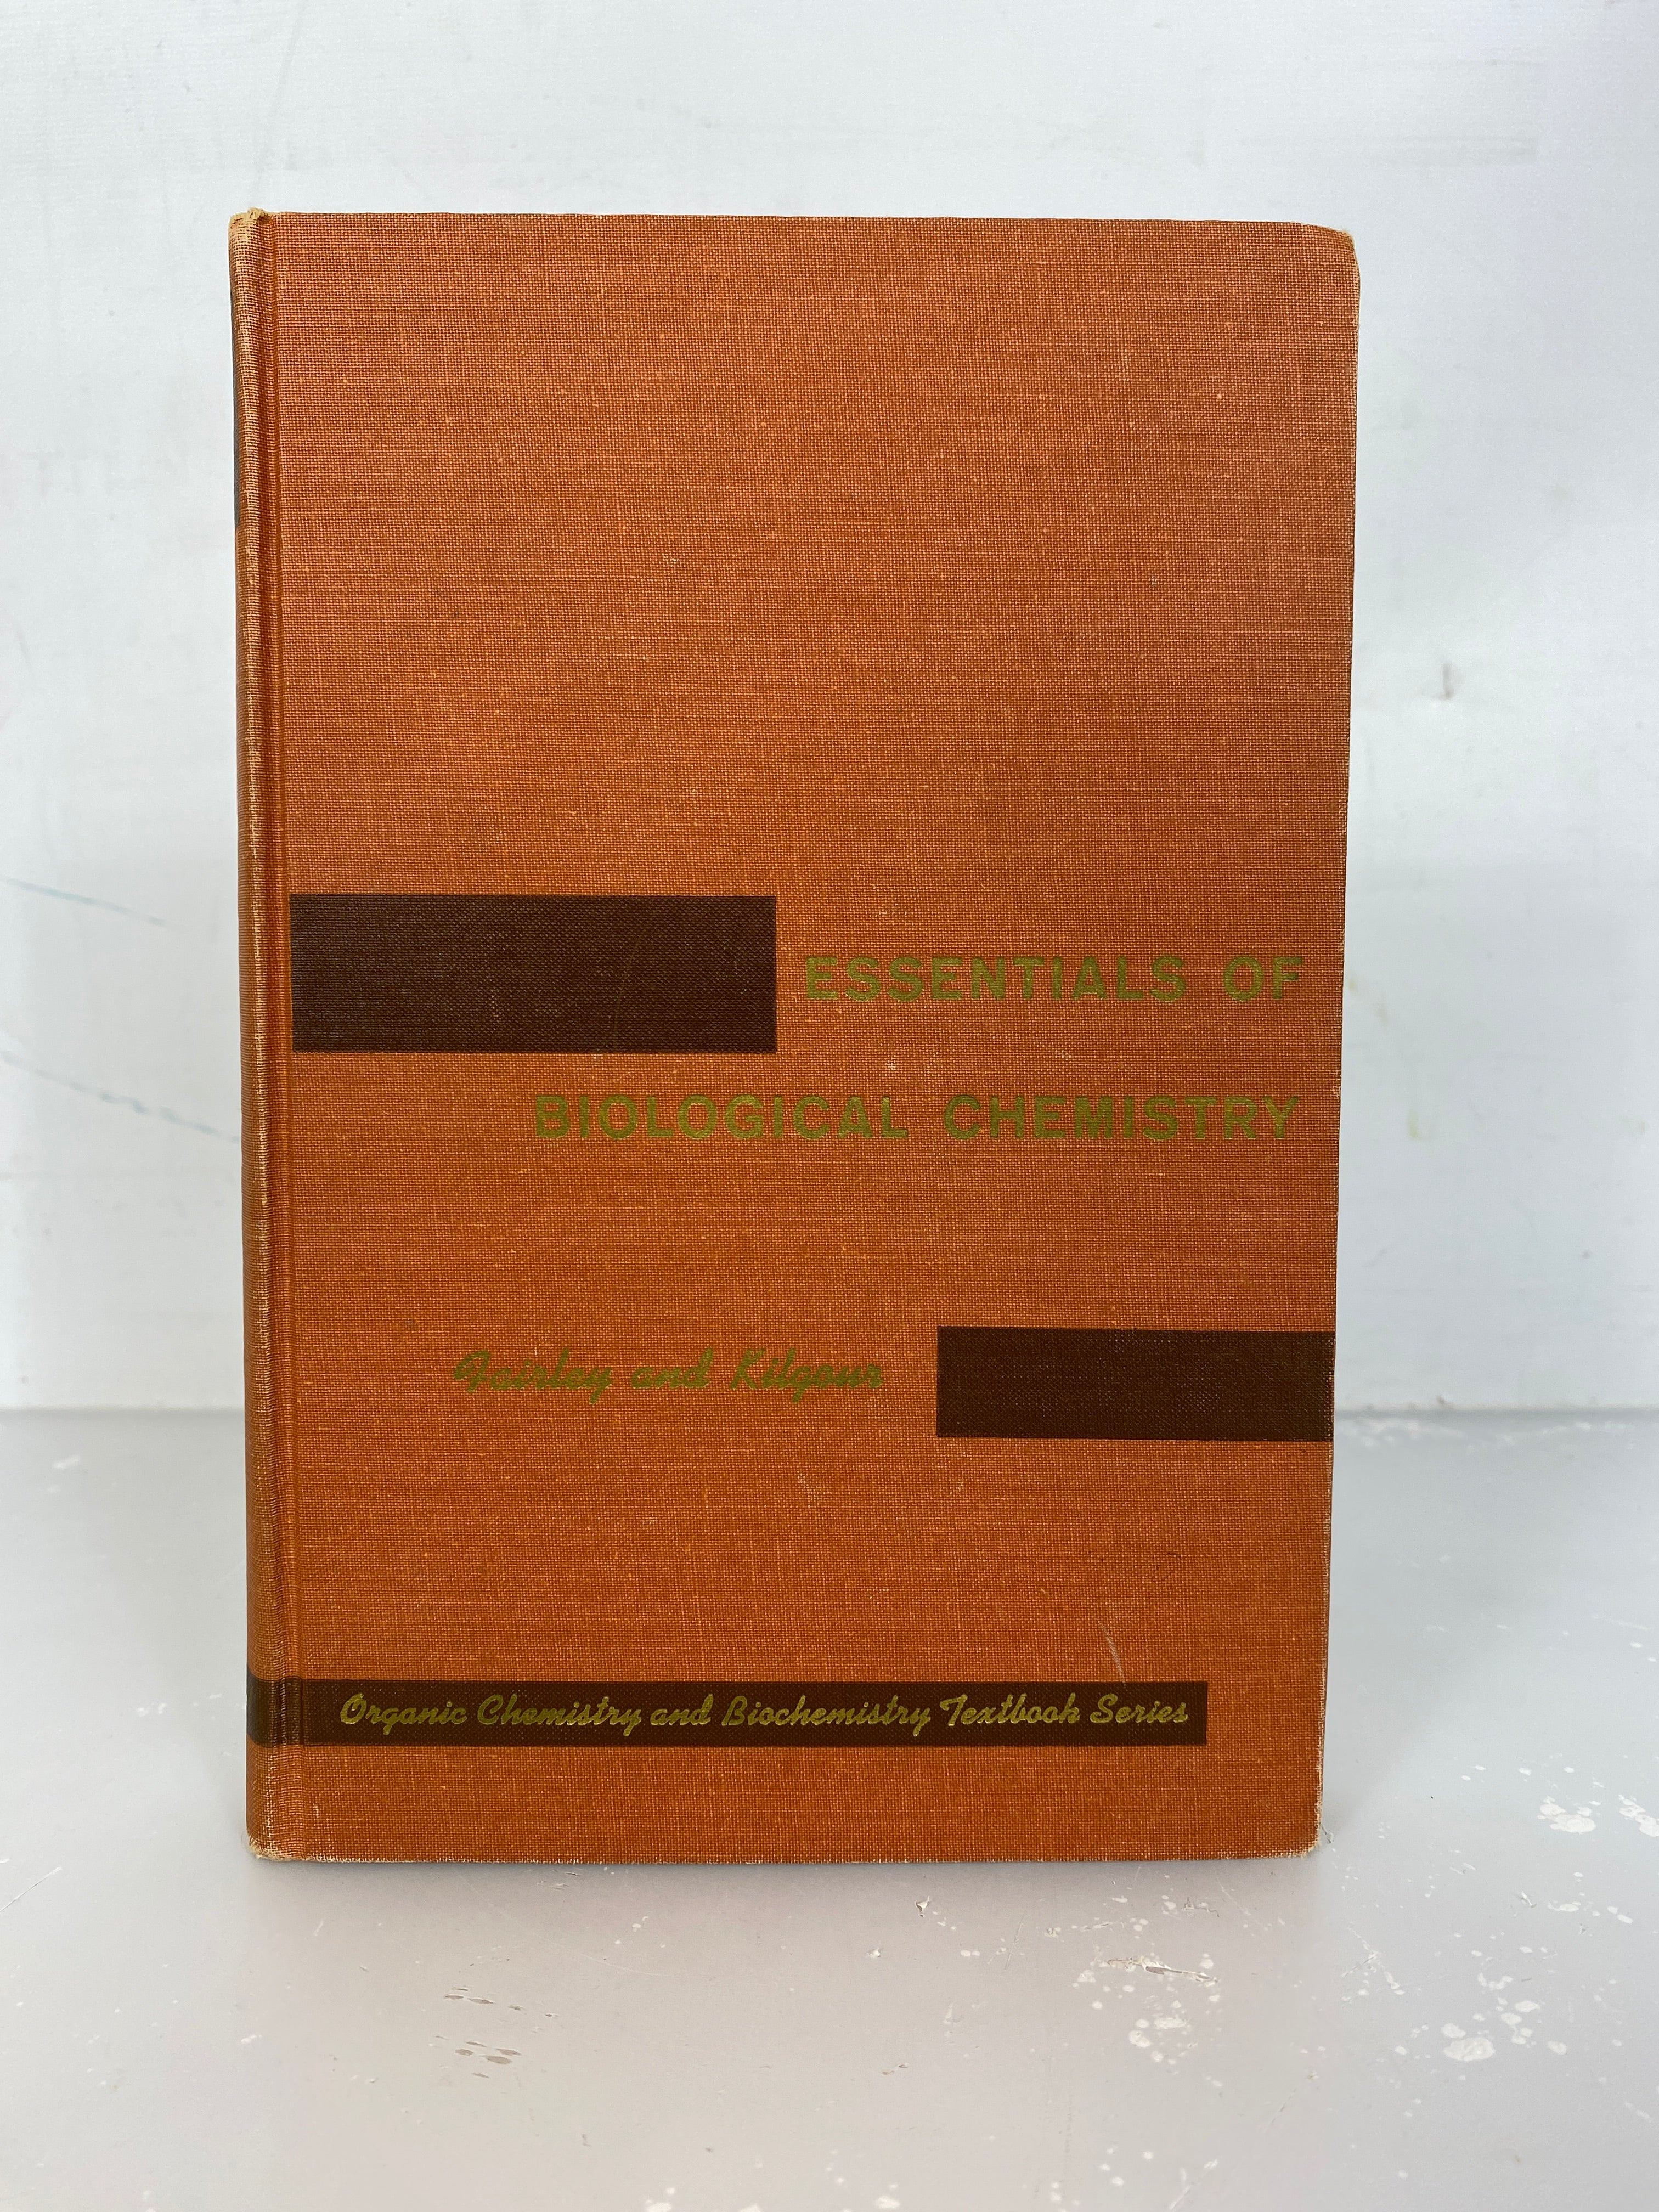 Vintage Chemistry Textbook: Essentials of Biological Chemistry by Fairley and Kilgour 1963 HC